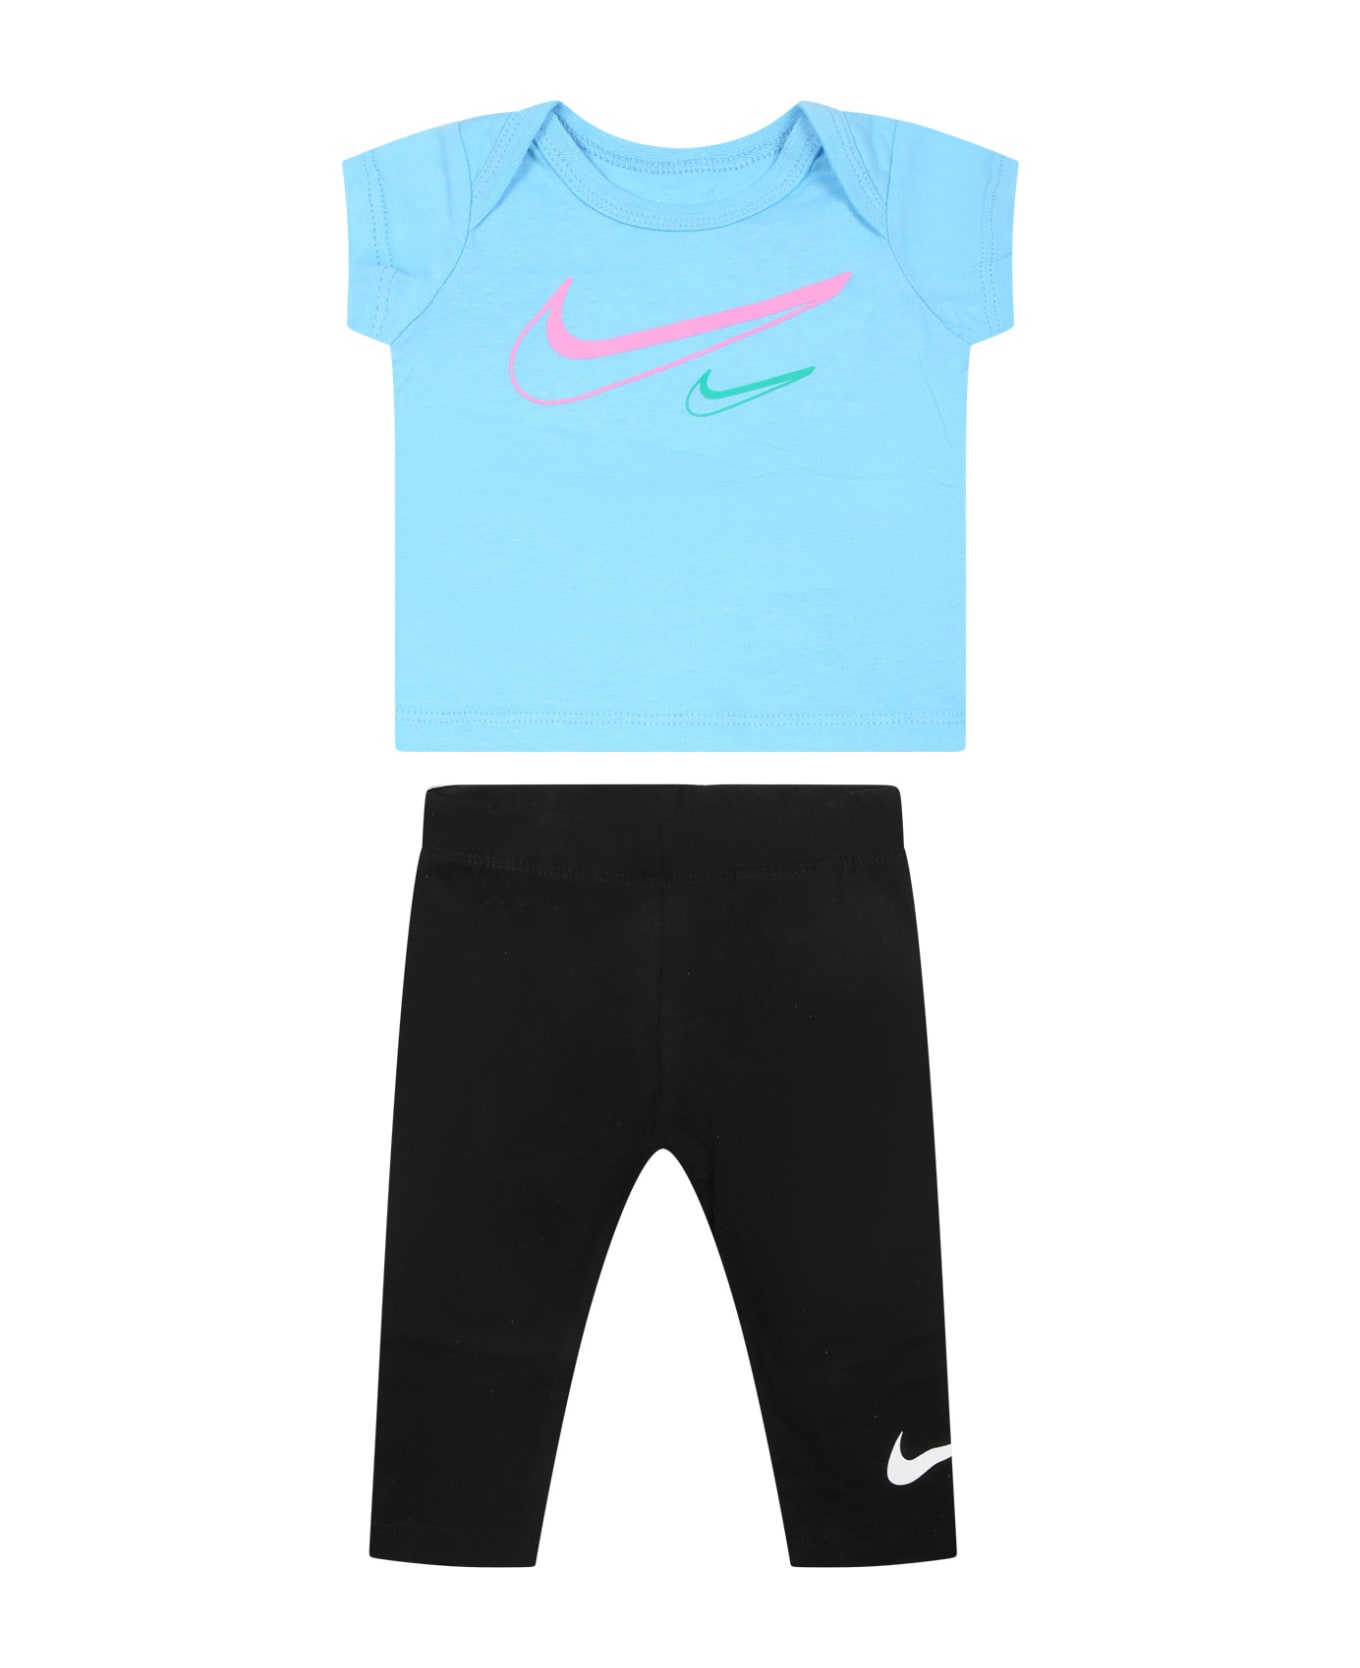 Nike Multicolor Suit For Baby Girl With Swoosh - Multicolor